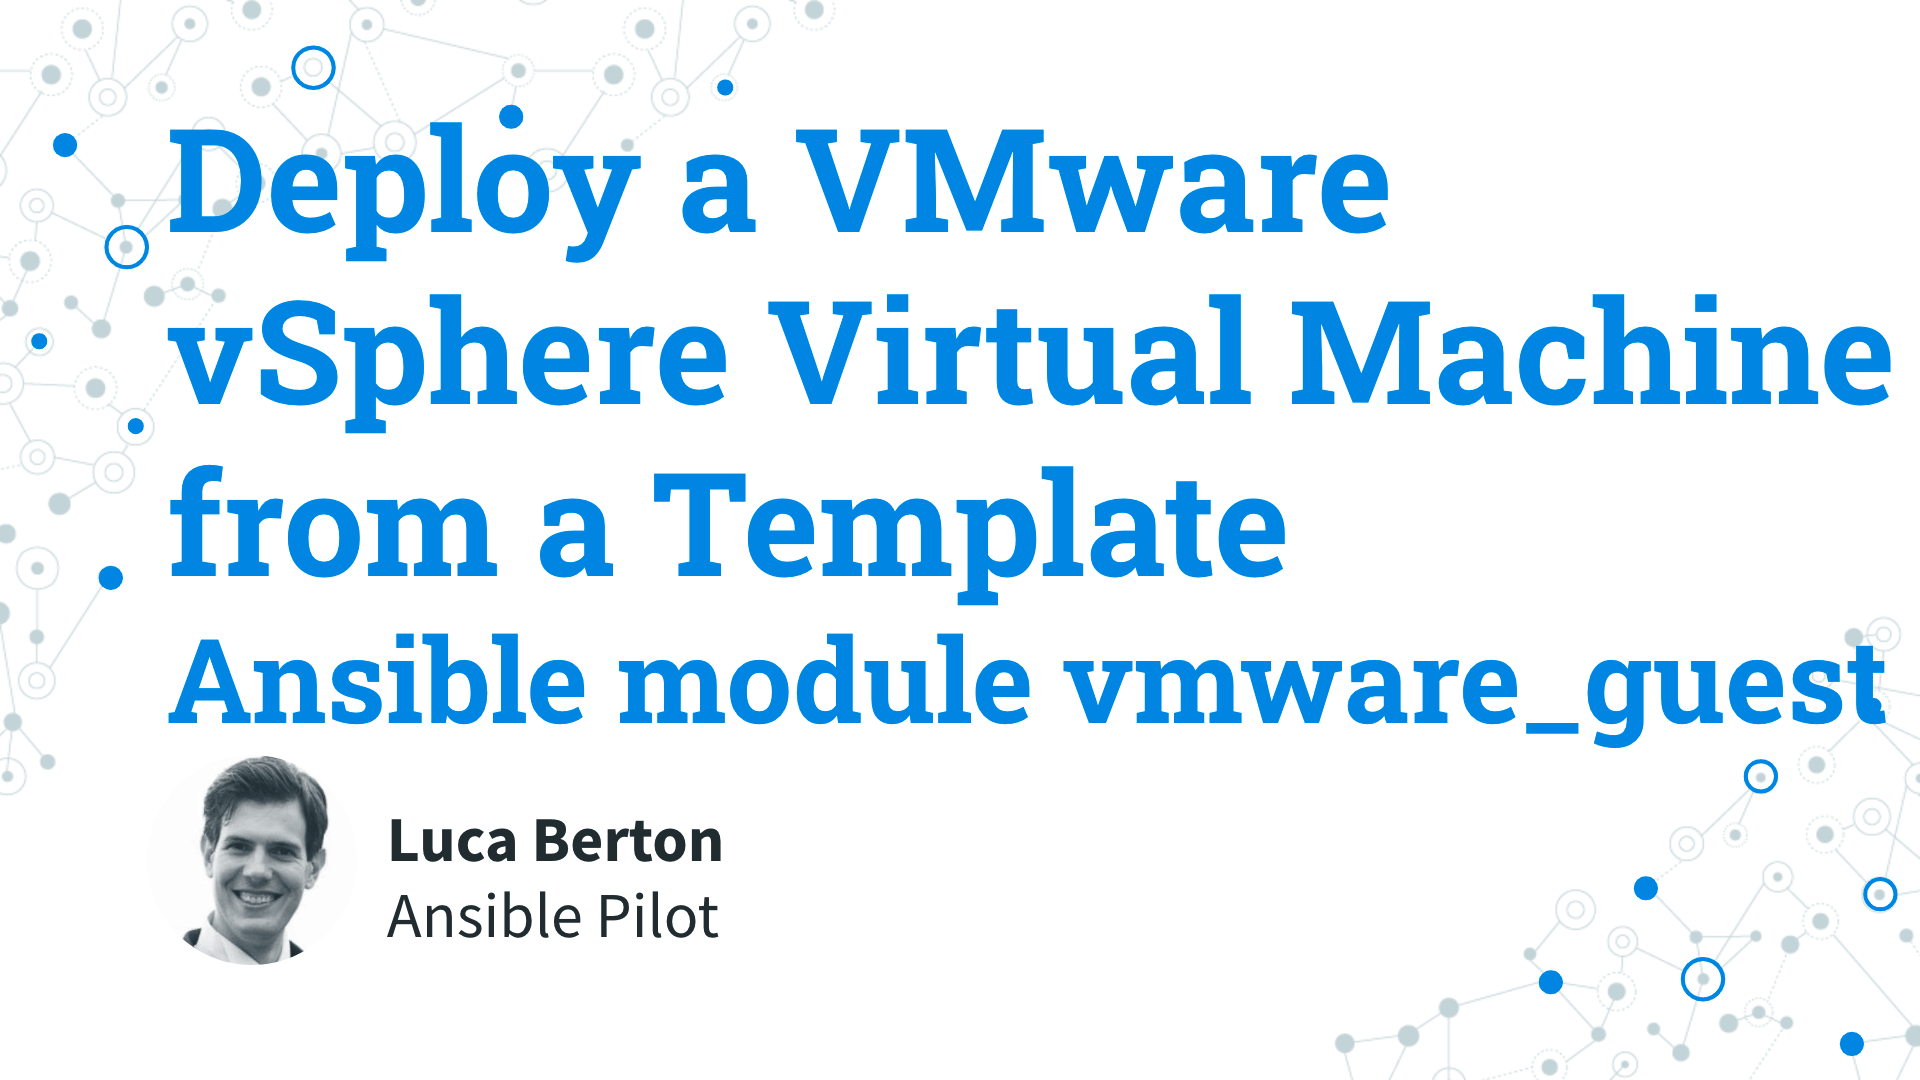 Deploy a VMware vSphere Virtual Machine from a Template - Ansible module vmware_guest